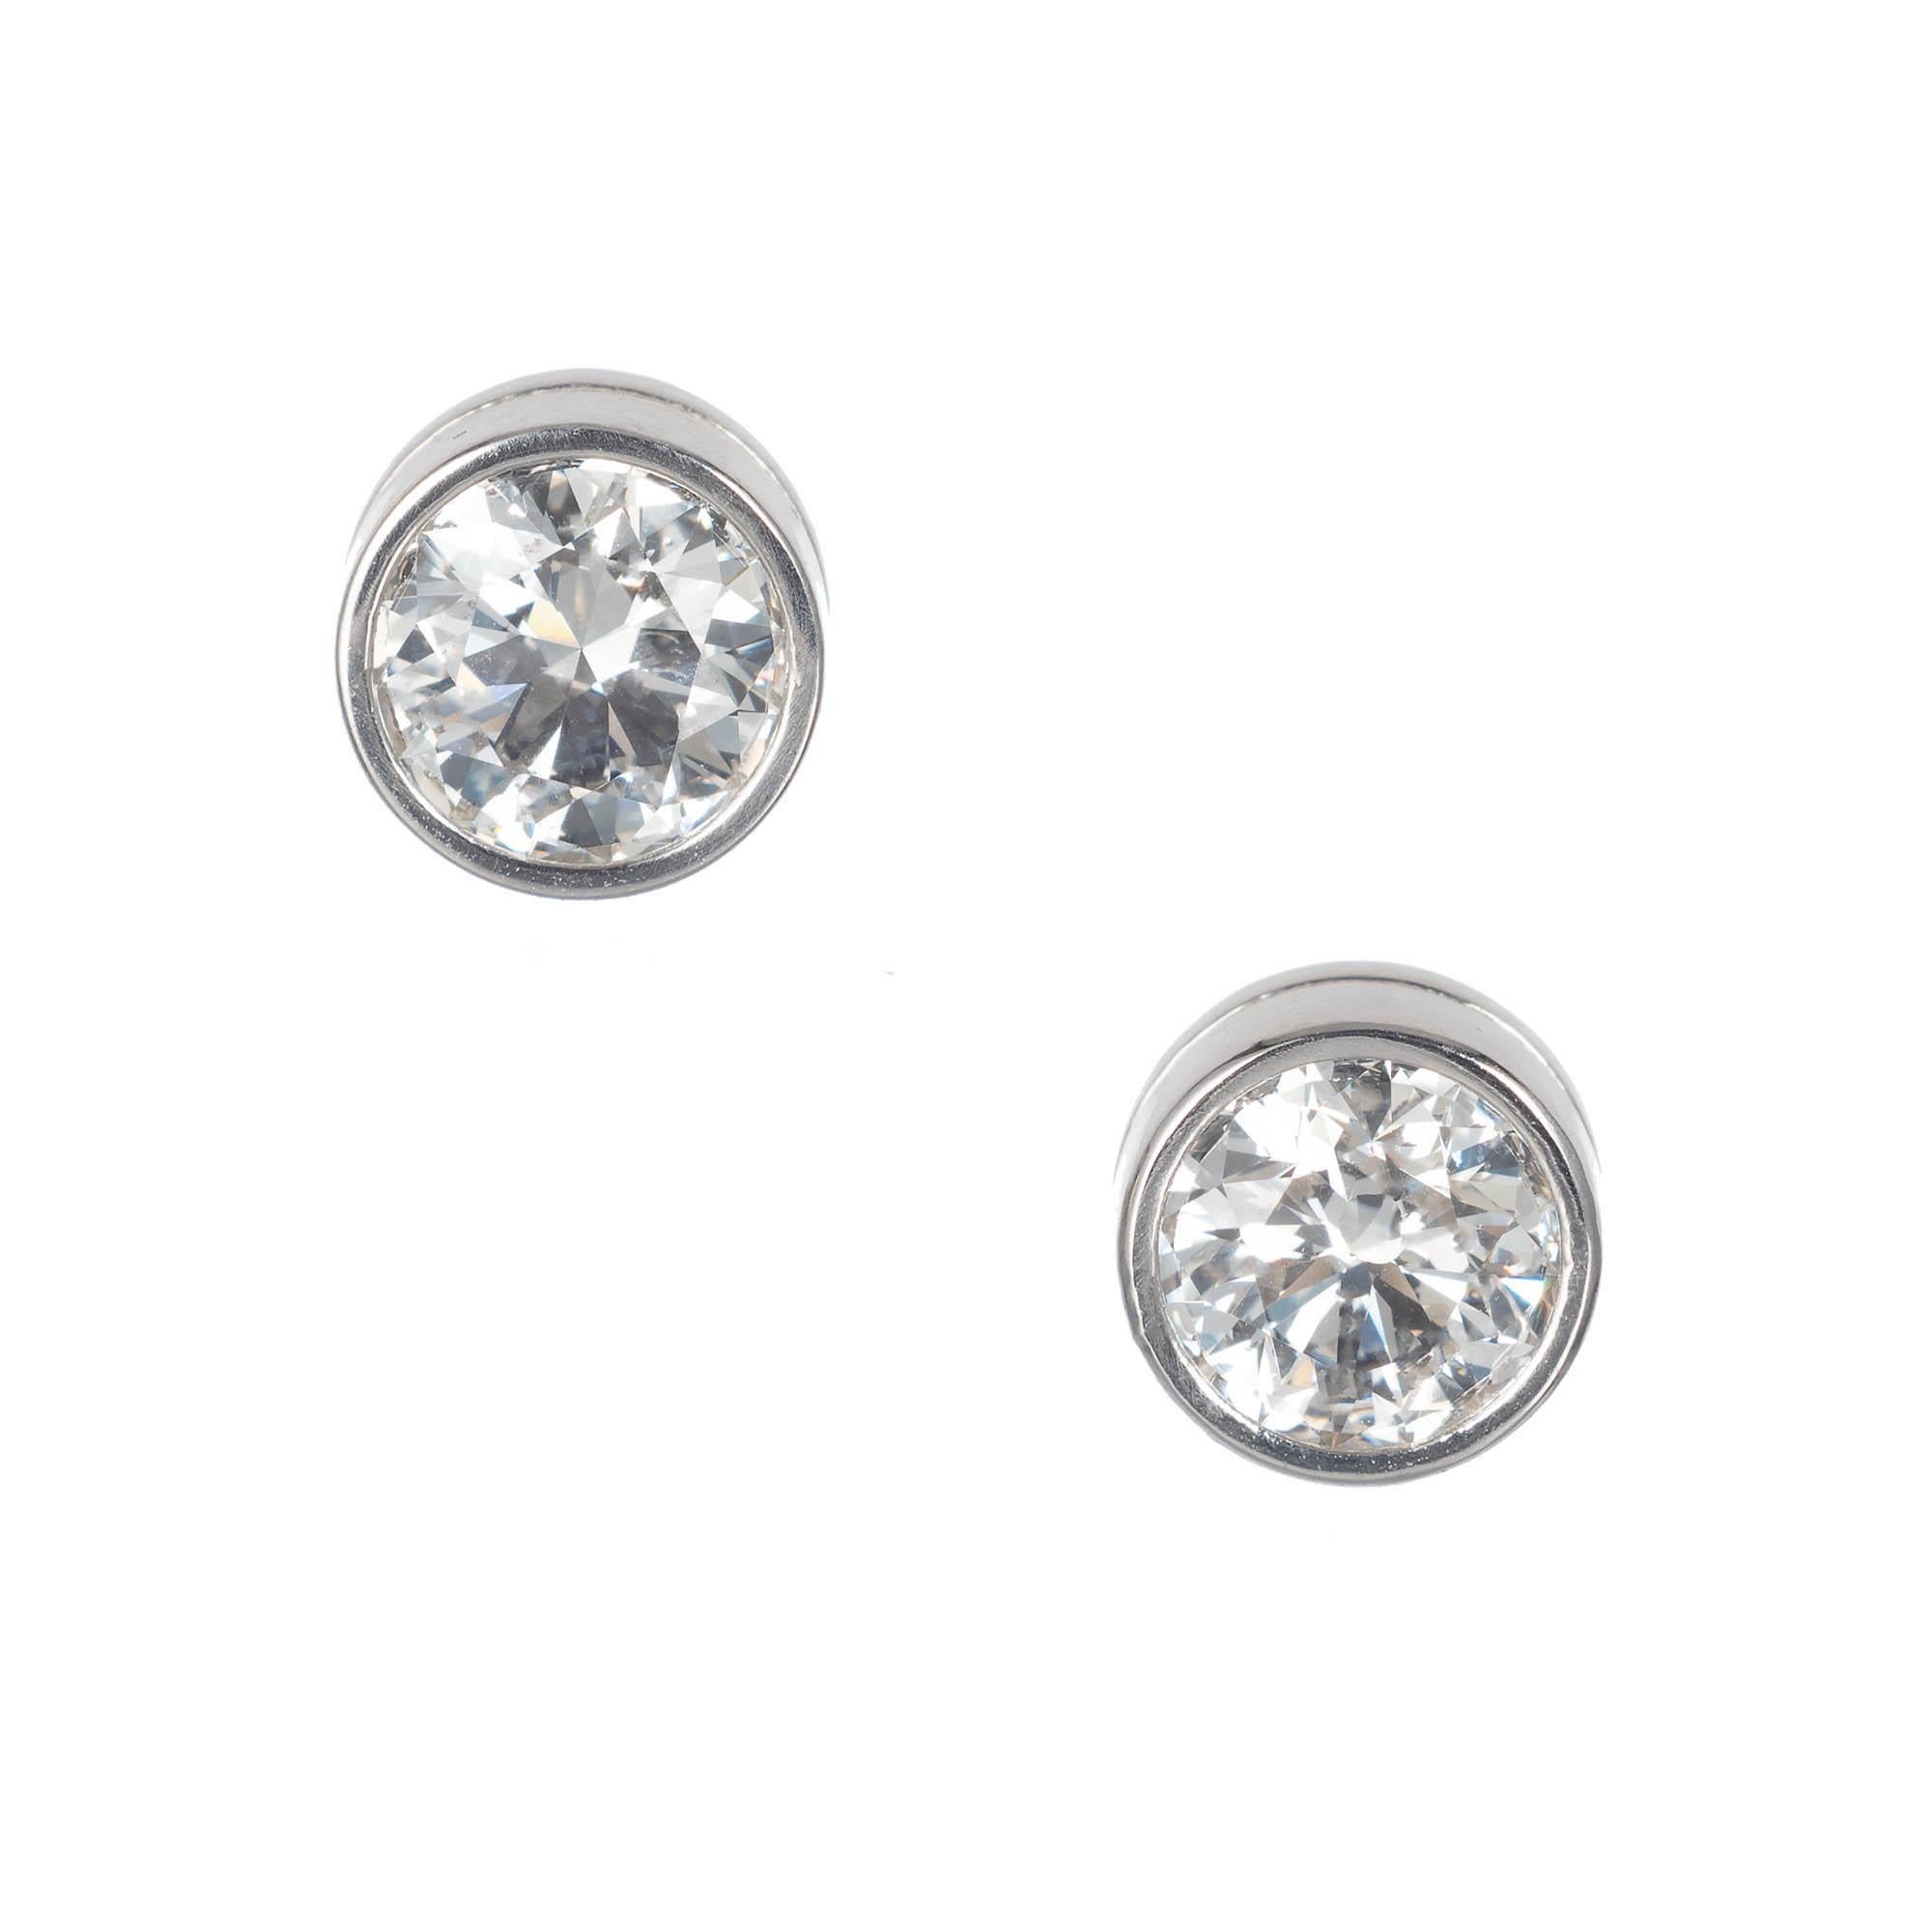 Peter Suchy Diamond Stud Earrings bezel set in platinum. Beautiful matched pair of bright sparkly Gia certified diamonds set in customized platinum bezels in the Peter Suchy workshop 

1 round brilliant cut I VVS2 diamonds, Approximate .83 carats.